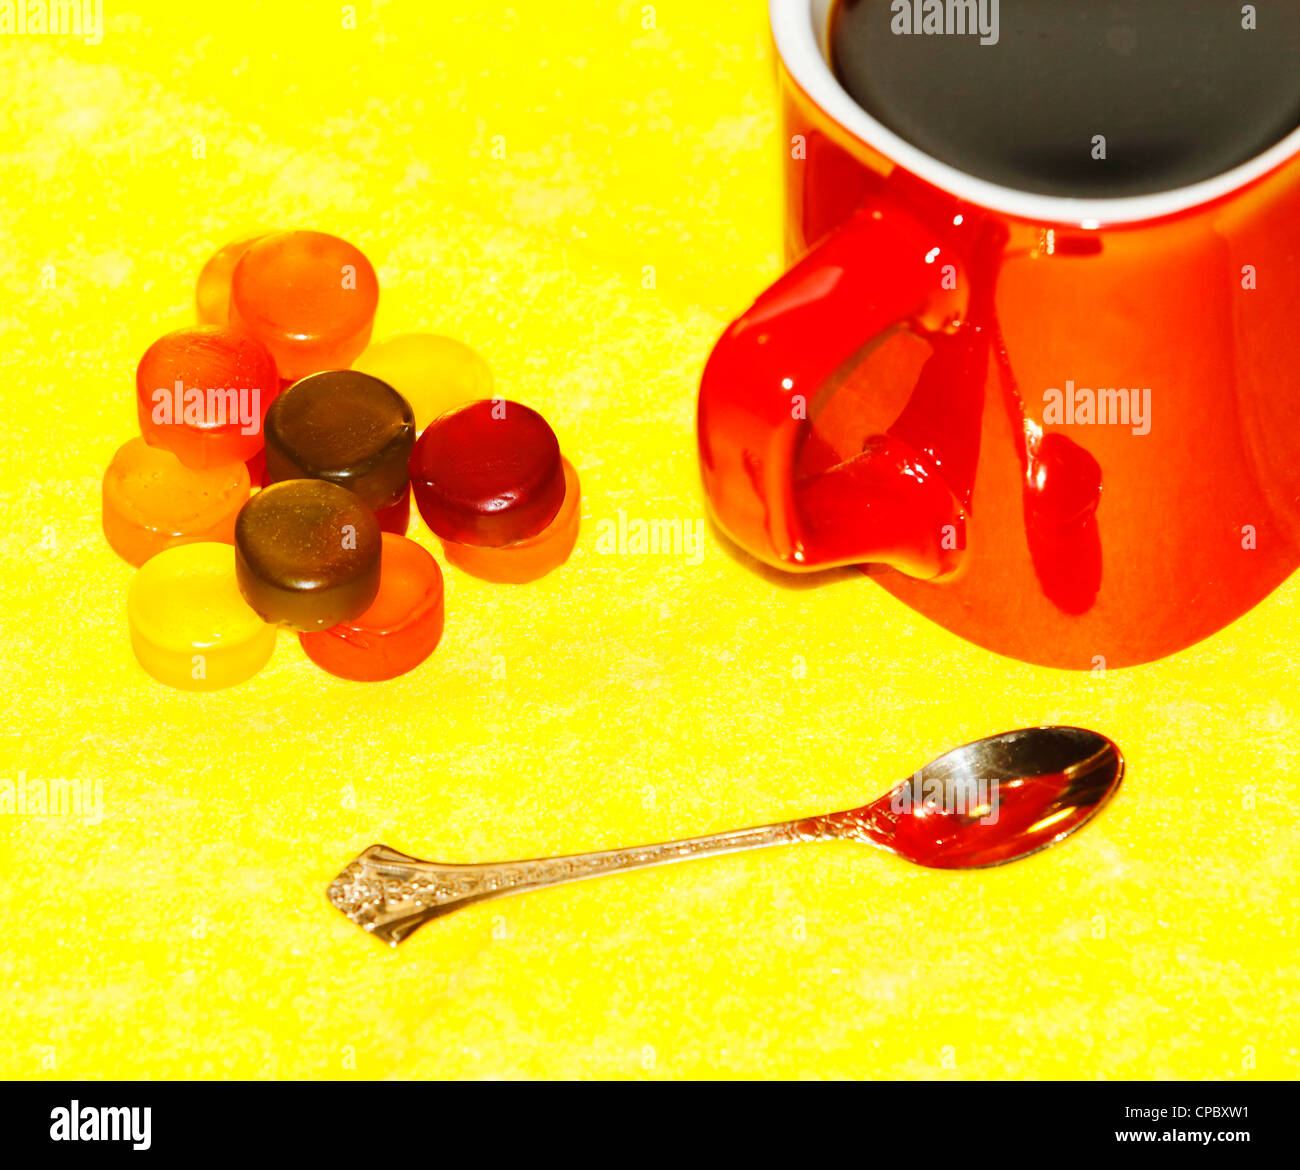 cup of coffee in the red, tasty, pretty sweet, golden spoon on a yellow background Stock Photo